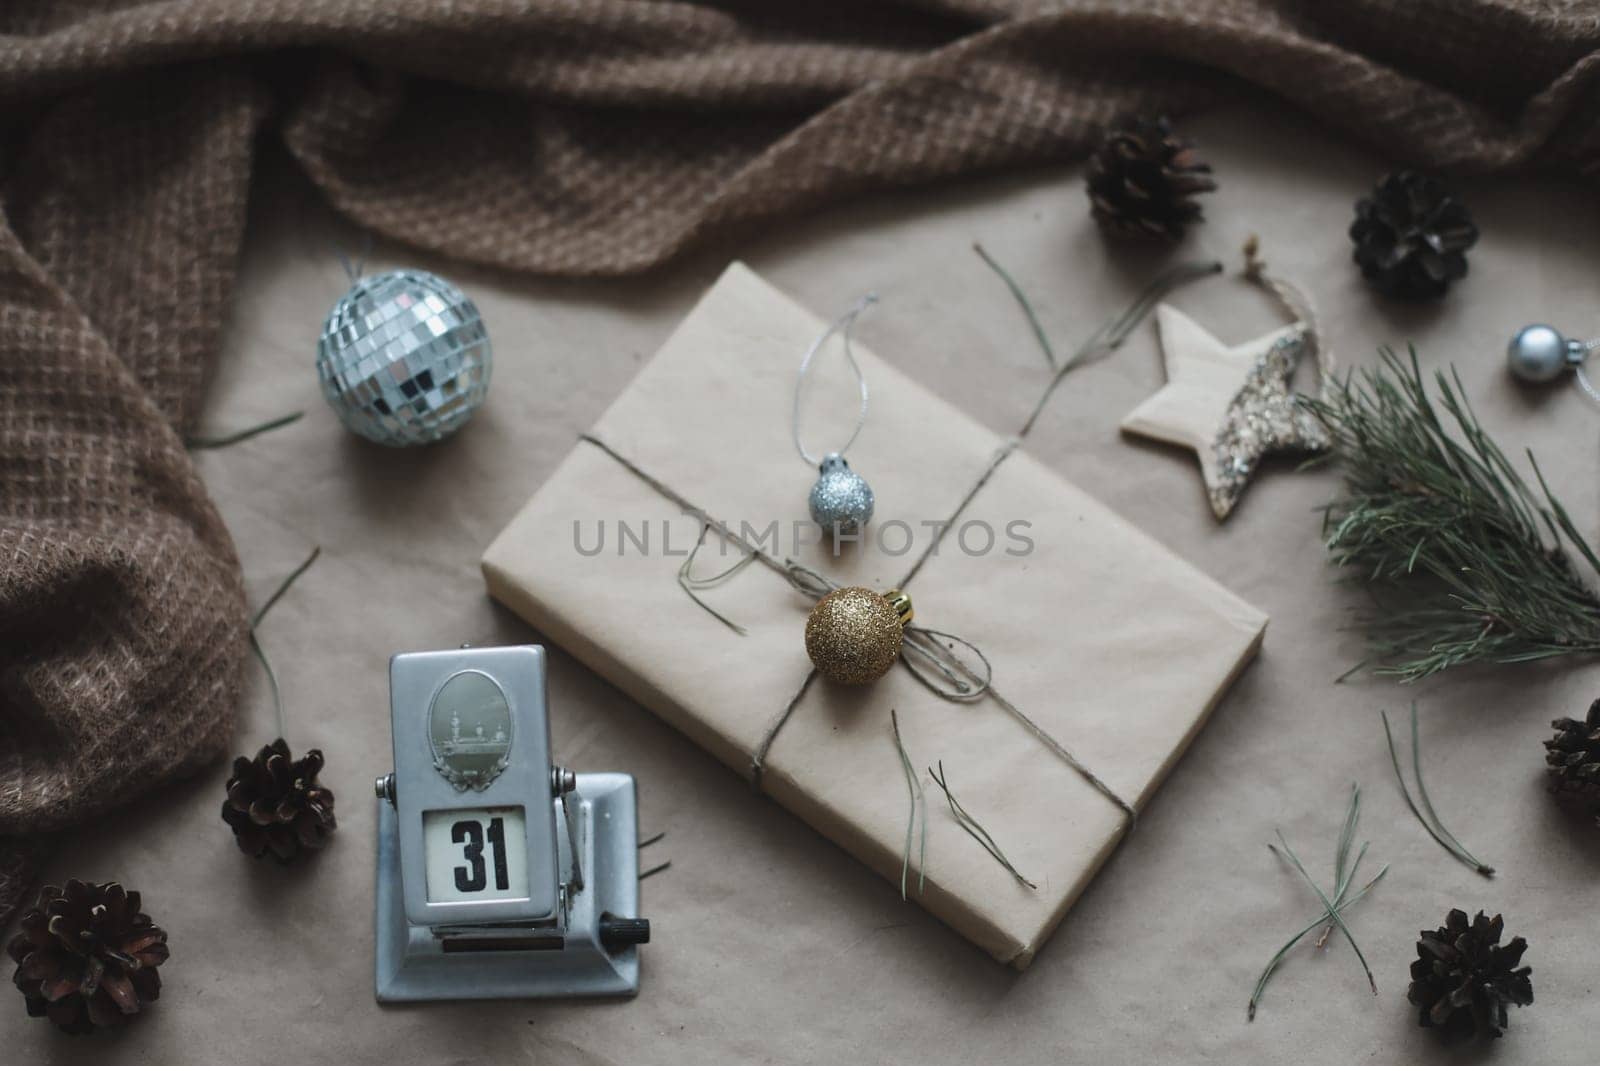 Christmas composition. New Year eve. December 31 on calendar on a craft paper background with spruce branches and a glowing garland. New year's date. Flat lay, top view by paralisart